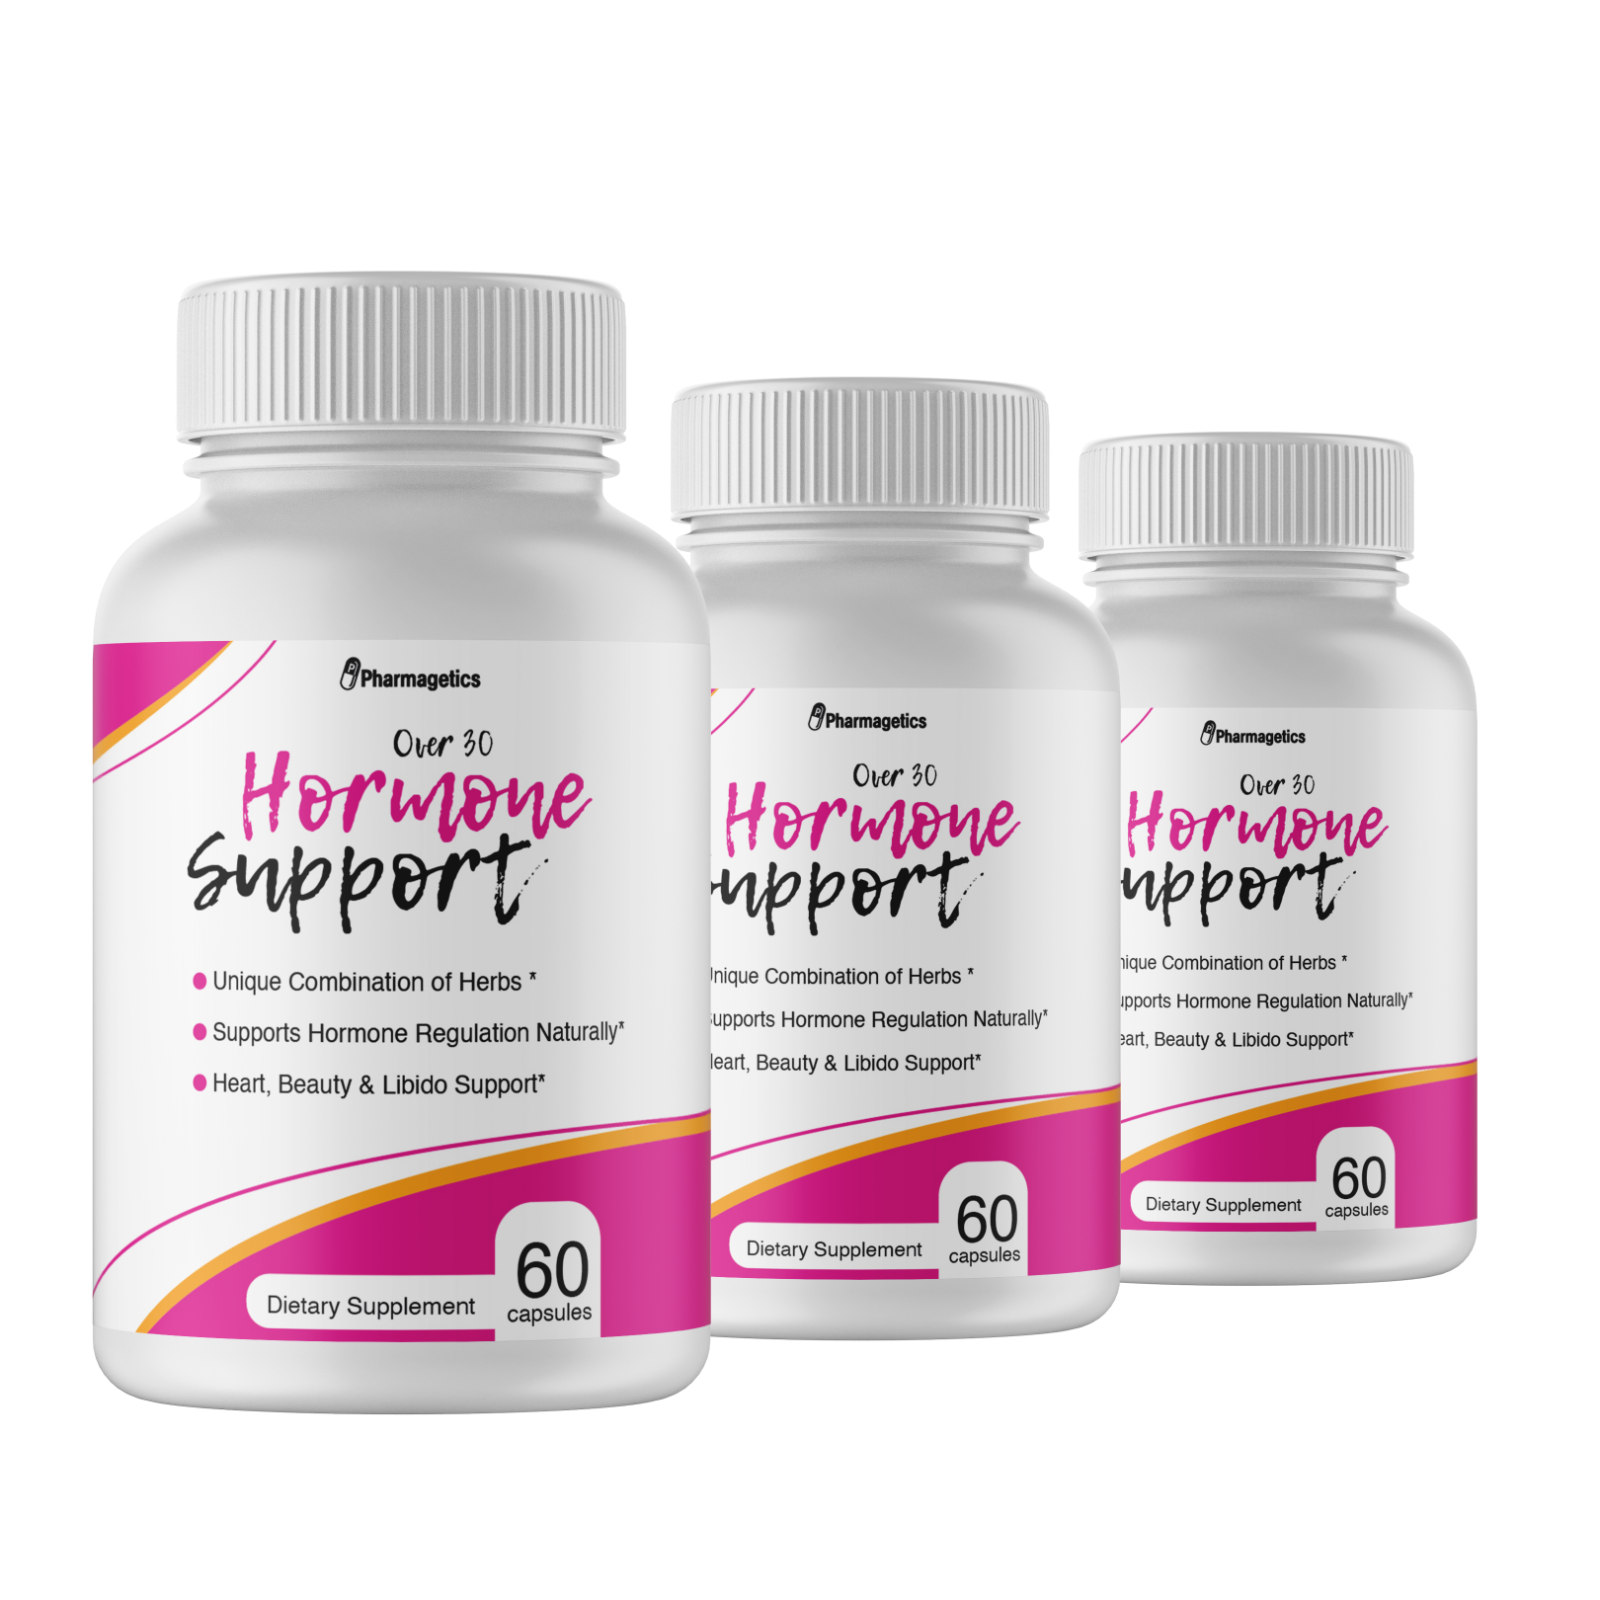 Over 30 Hormone Support Dietary Supplement - 3 Bottles 180 Capsules